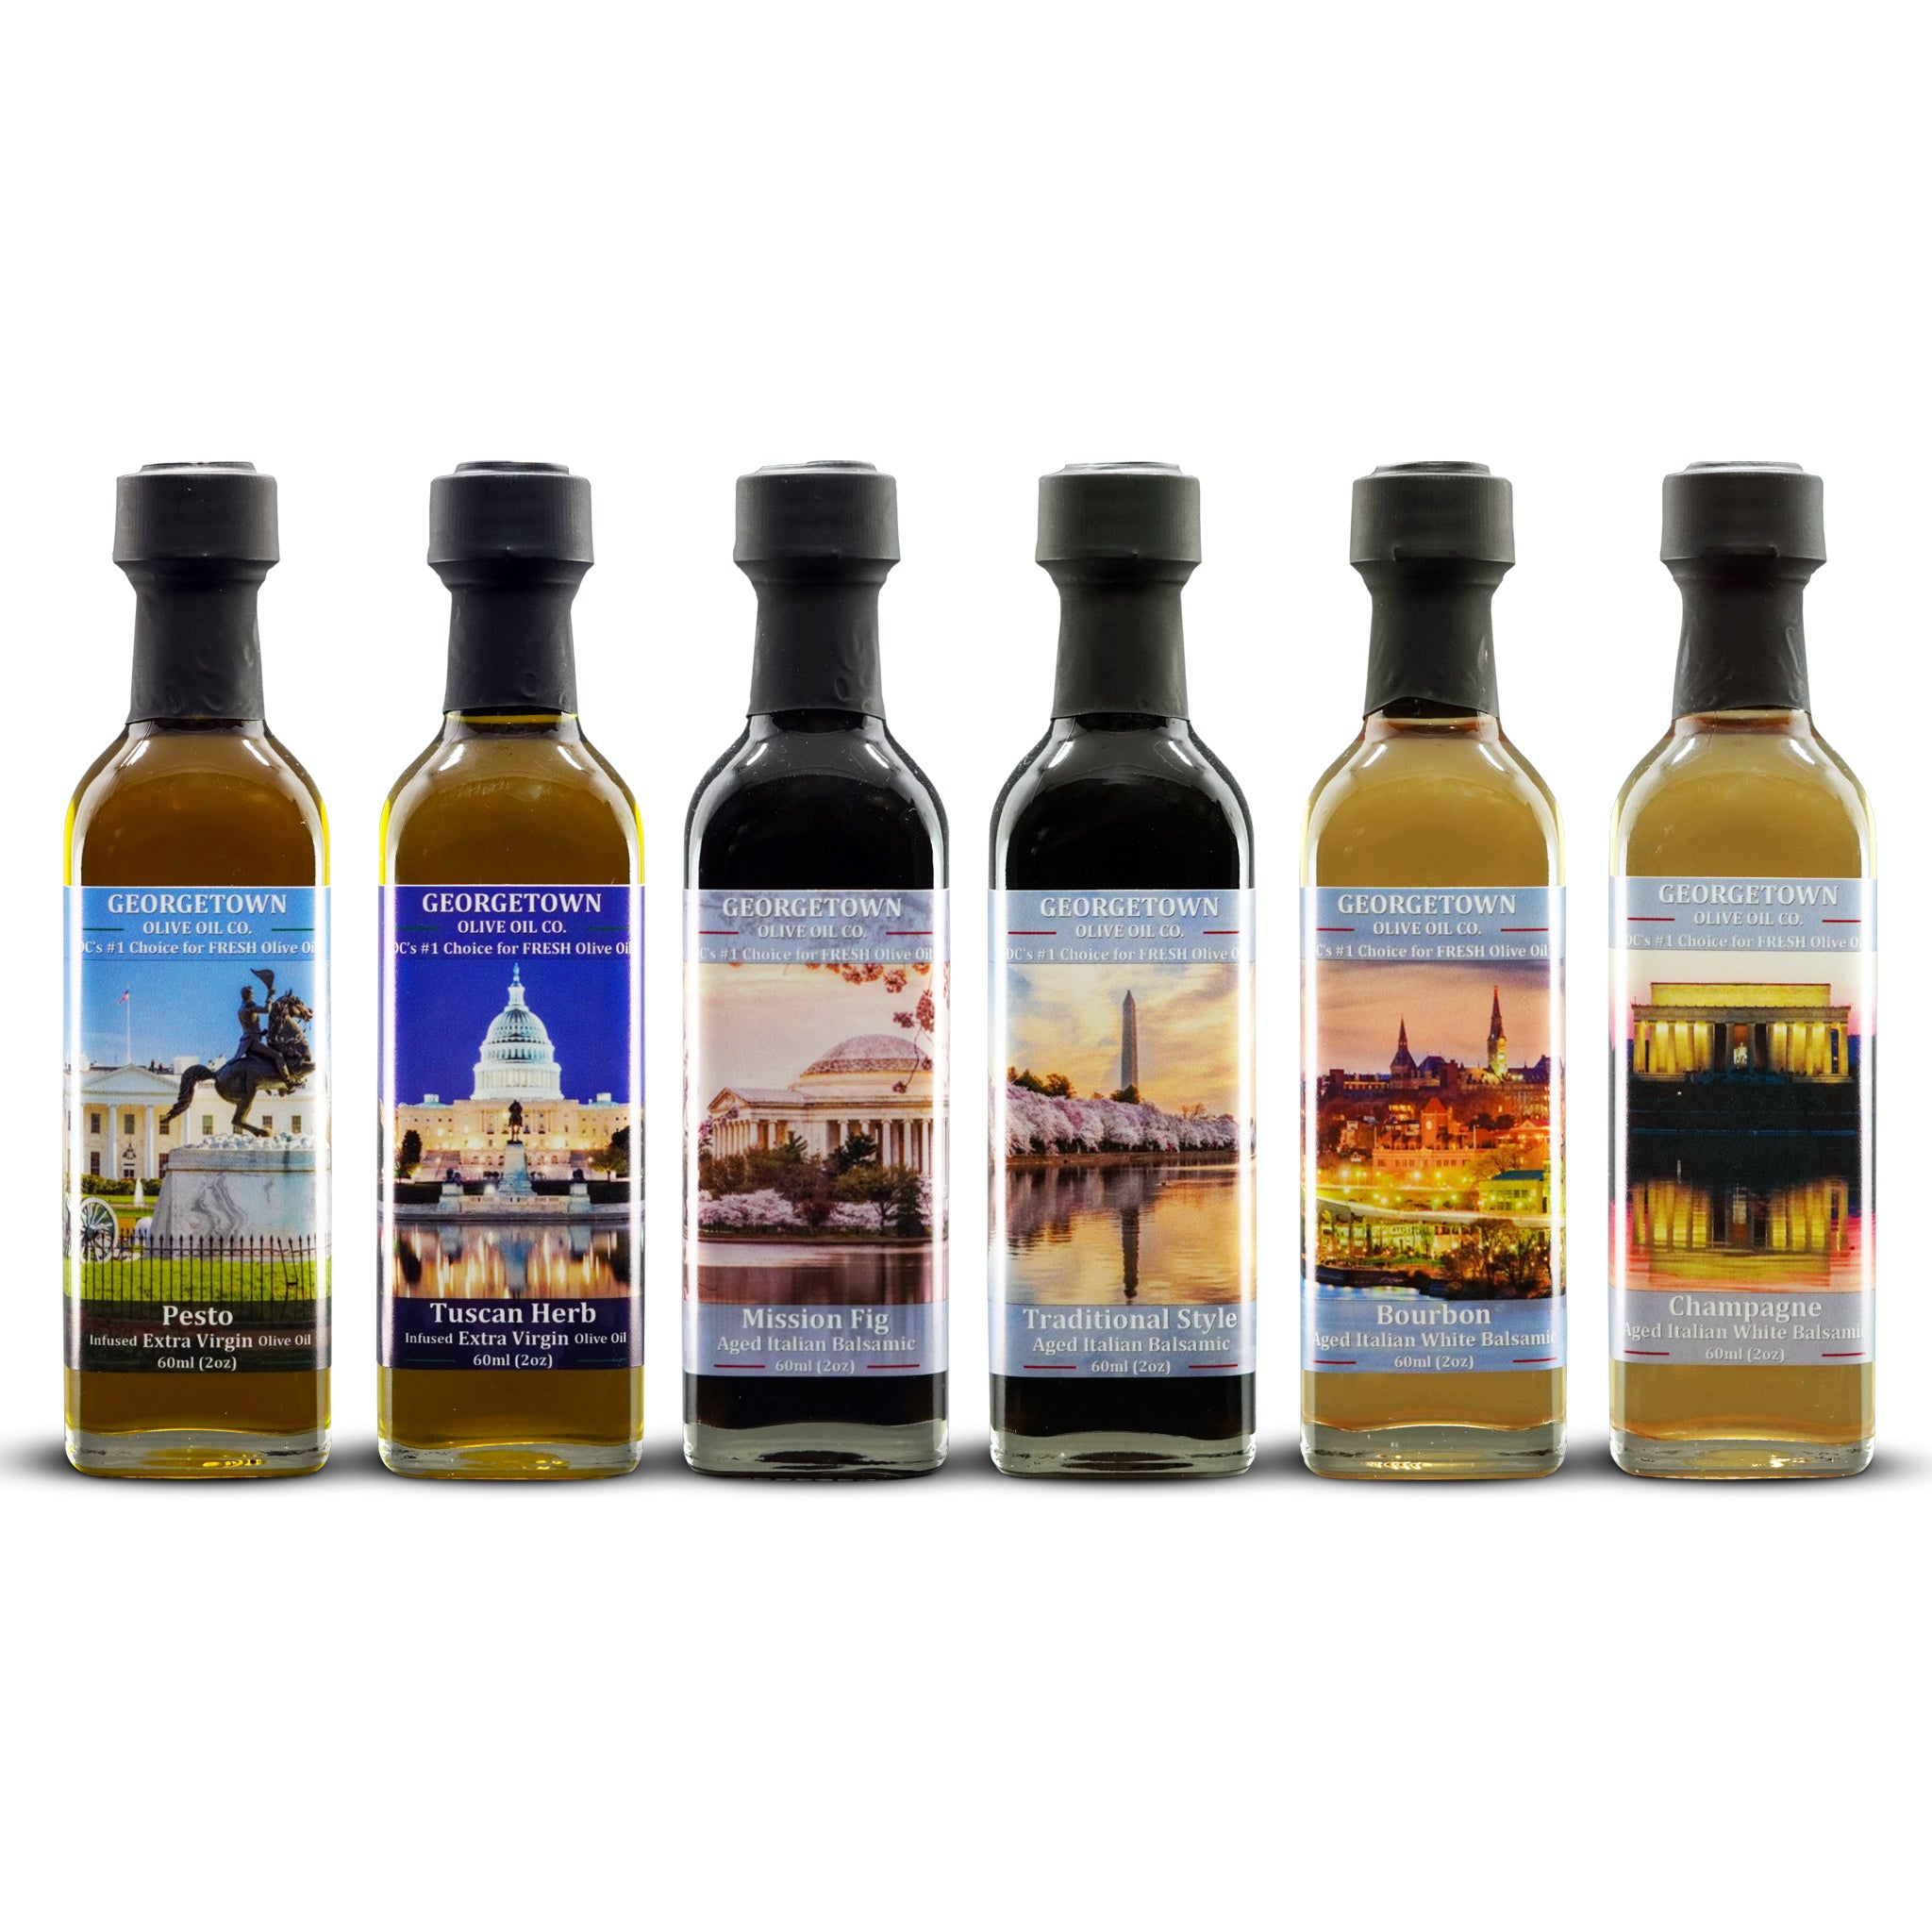 Washington DC Oil and Vinegar Variety Gift Pack Georgetown Olive Oil Co